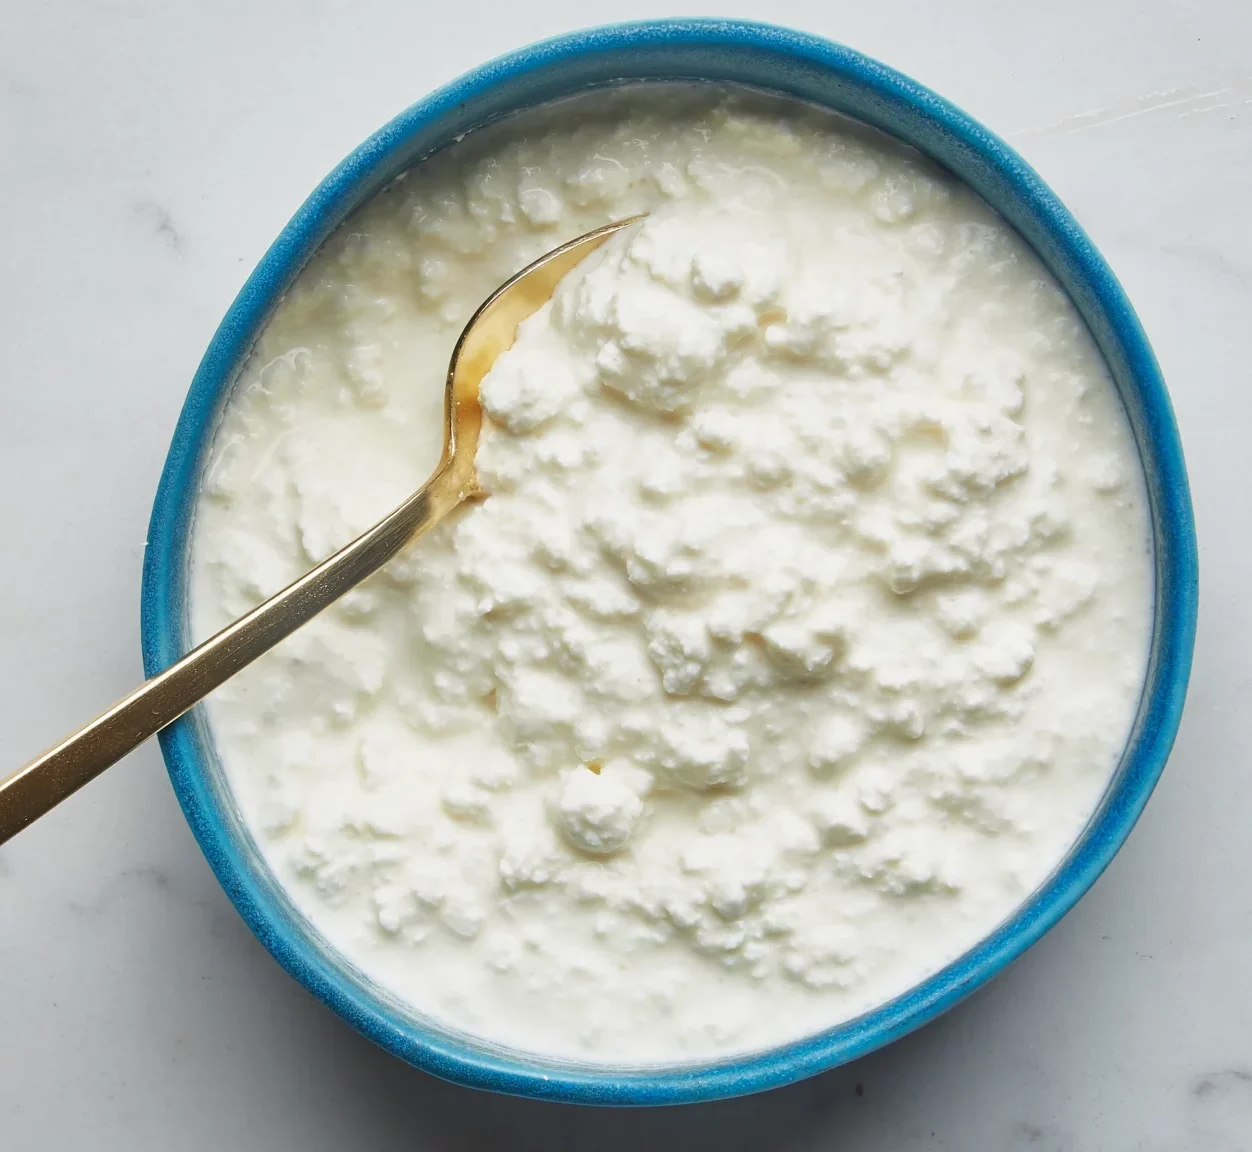 substitute for sour cream in cheesecake, cheesecake sour cream substitute, sour cream substitute for cheesecake, sour cream substitute in cheesecake, sour cream substitute cream cheese, cottage cheese